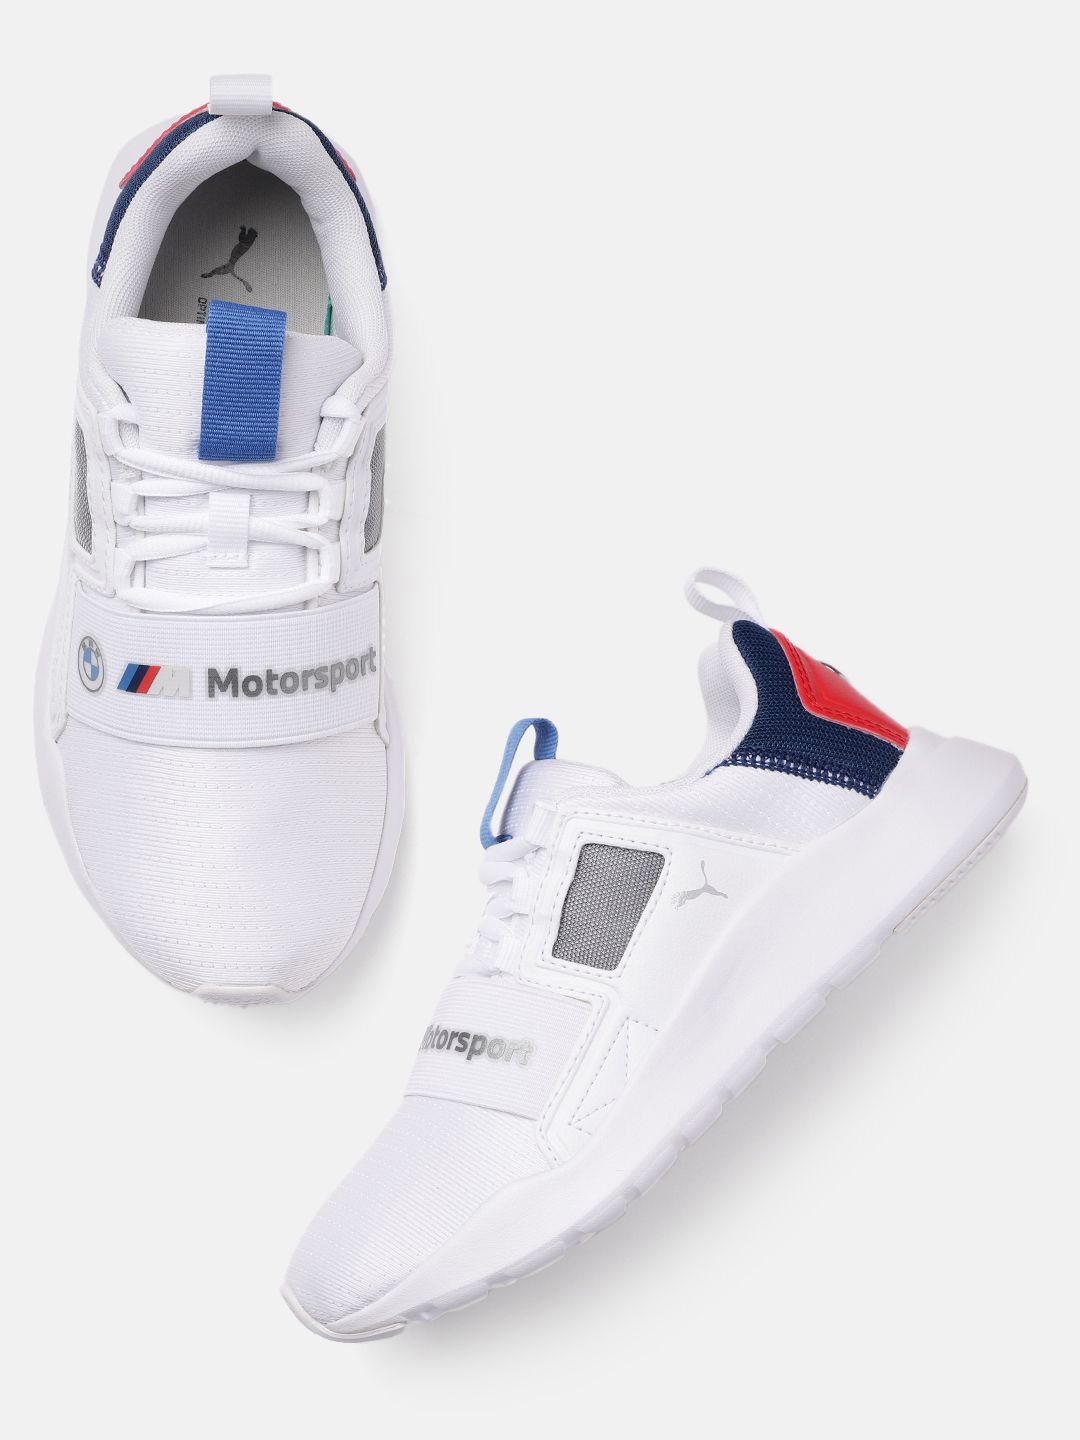 PUMA Motorsport White BMW MMS Wired Cage SoftFoam Sneakers Price in India